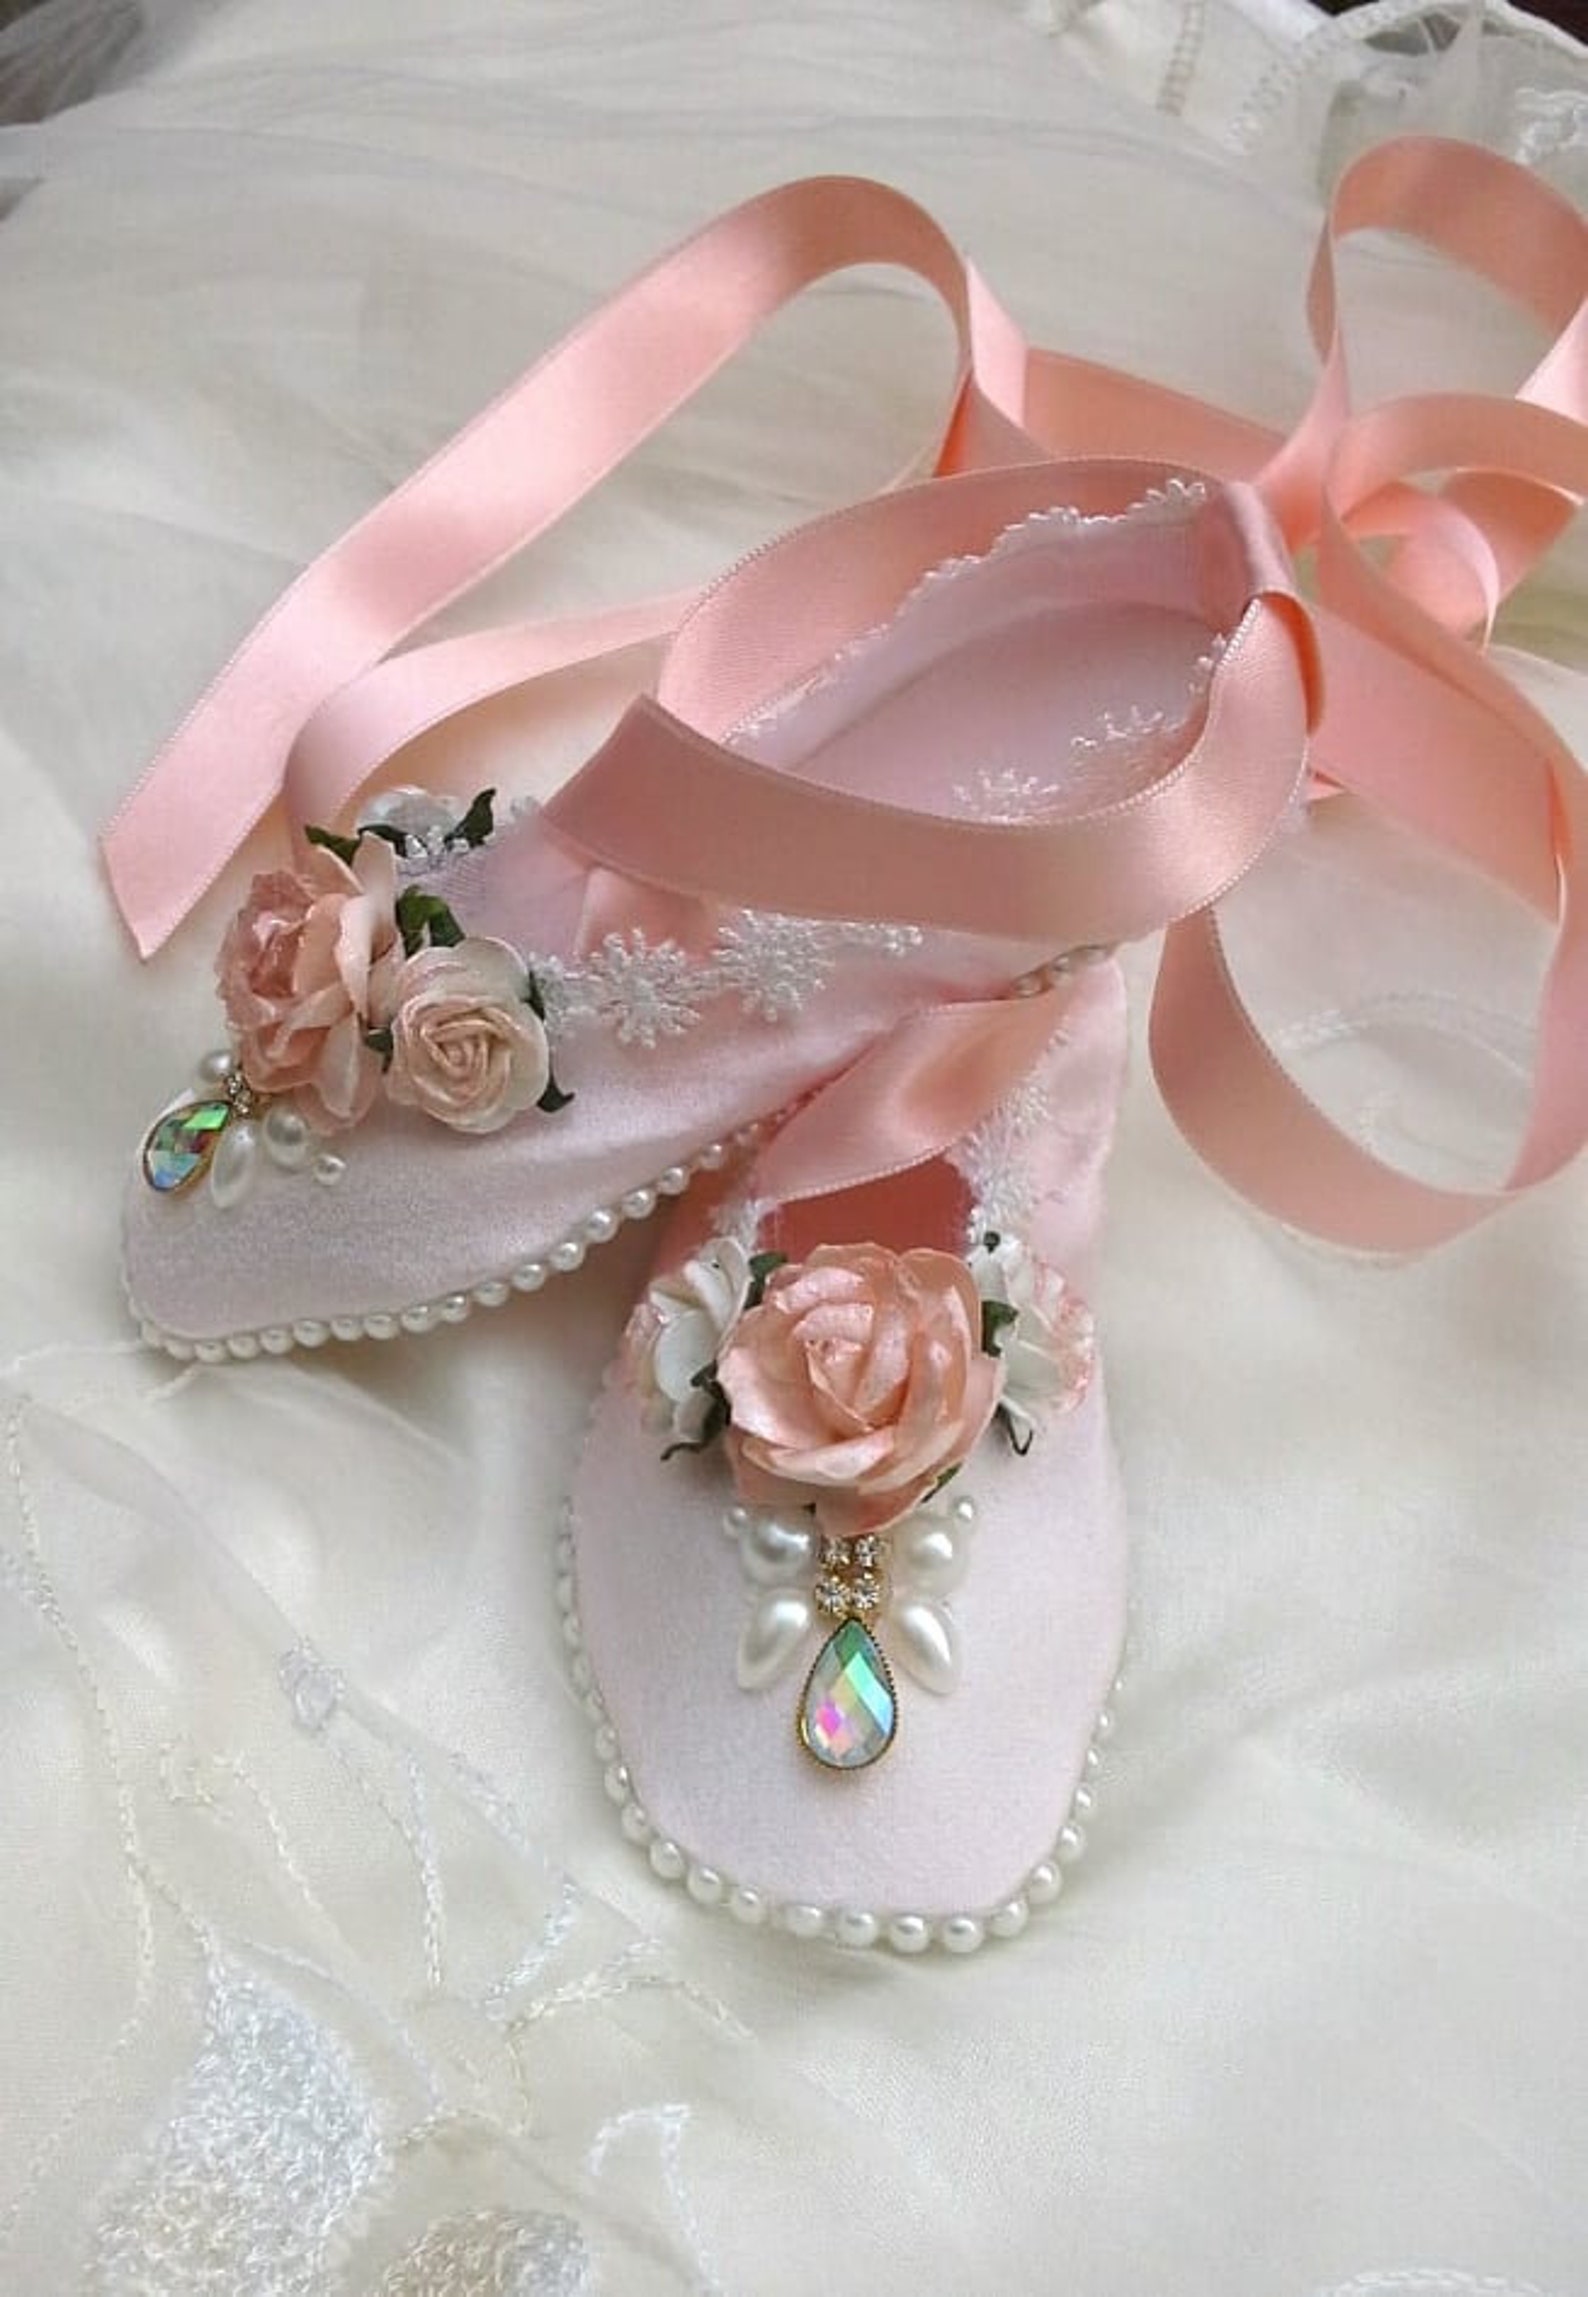 decorated pointe shoes, ballet shoes, decorated ballet slippers, decorative ballet shoes, shabby chic, ballet dancing shoes,gift